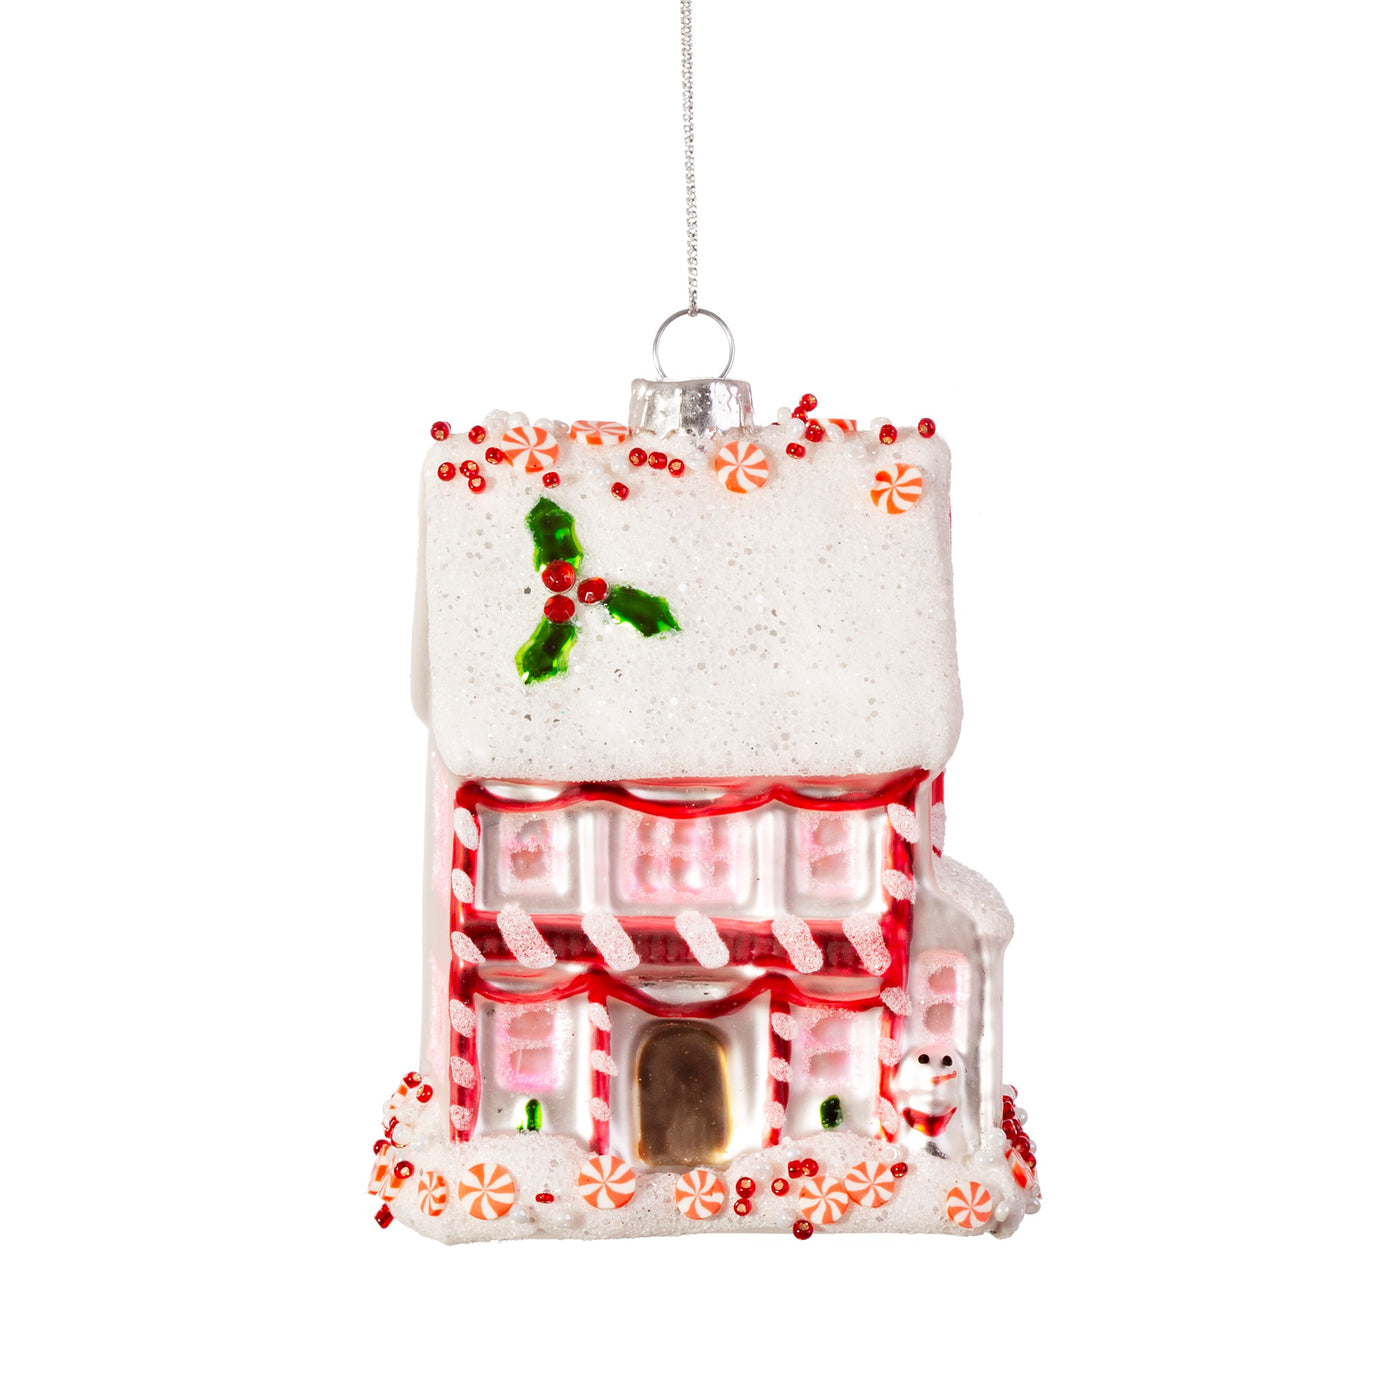 Gingerbread house Christmas ornament